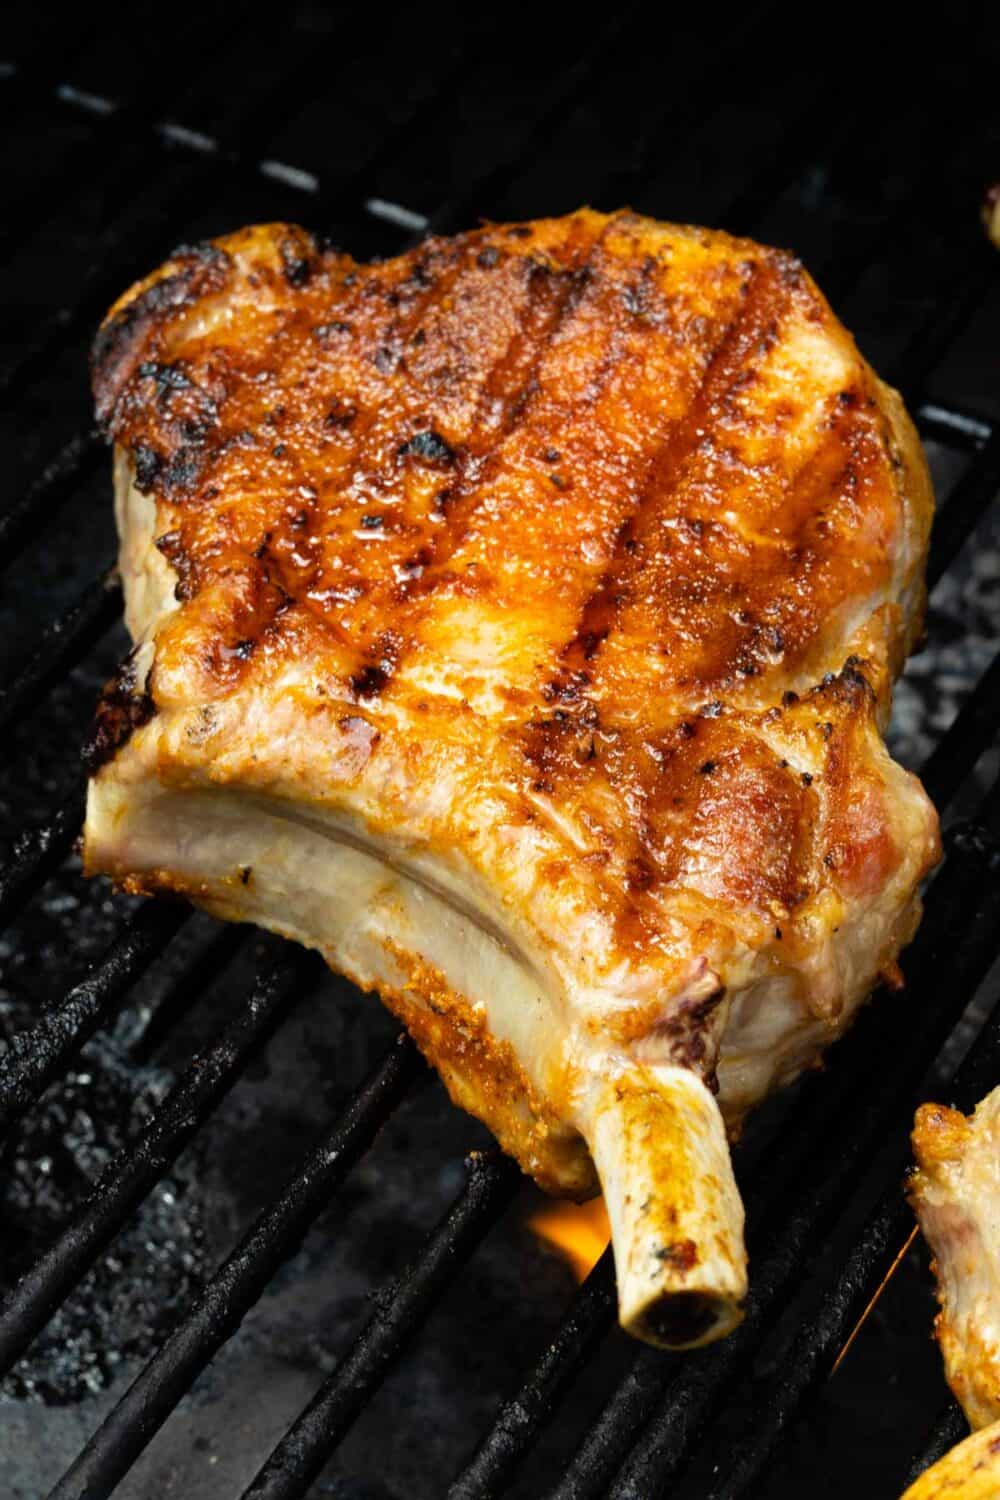 Grilled pork chop on a grill grate and fire underneath.